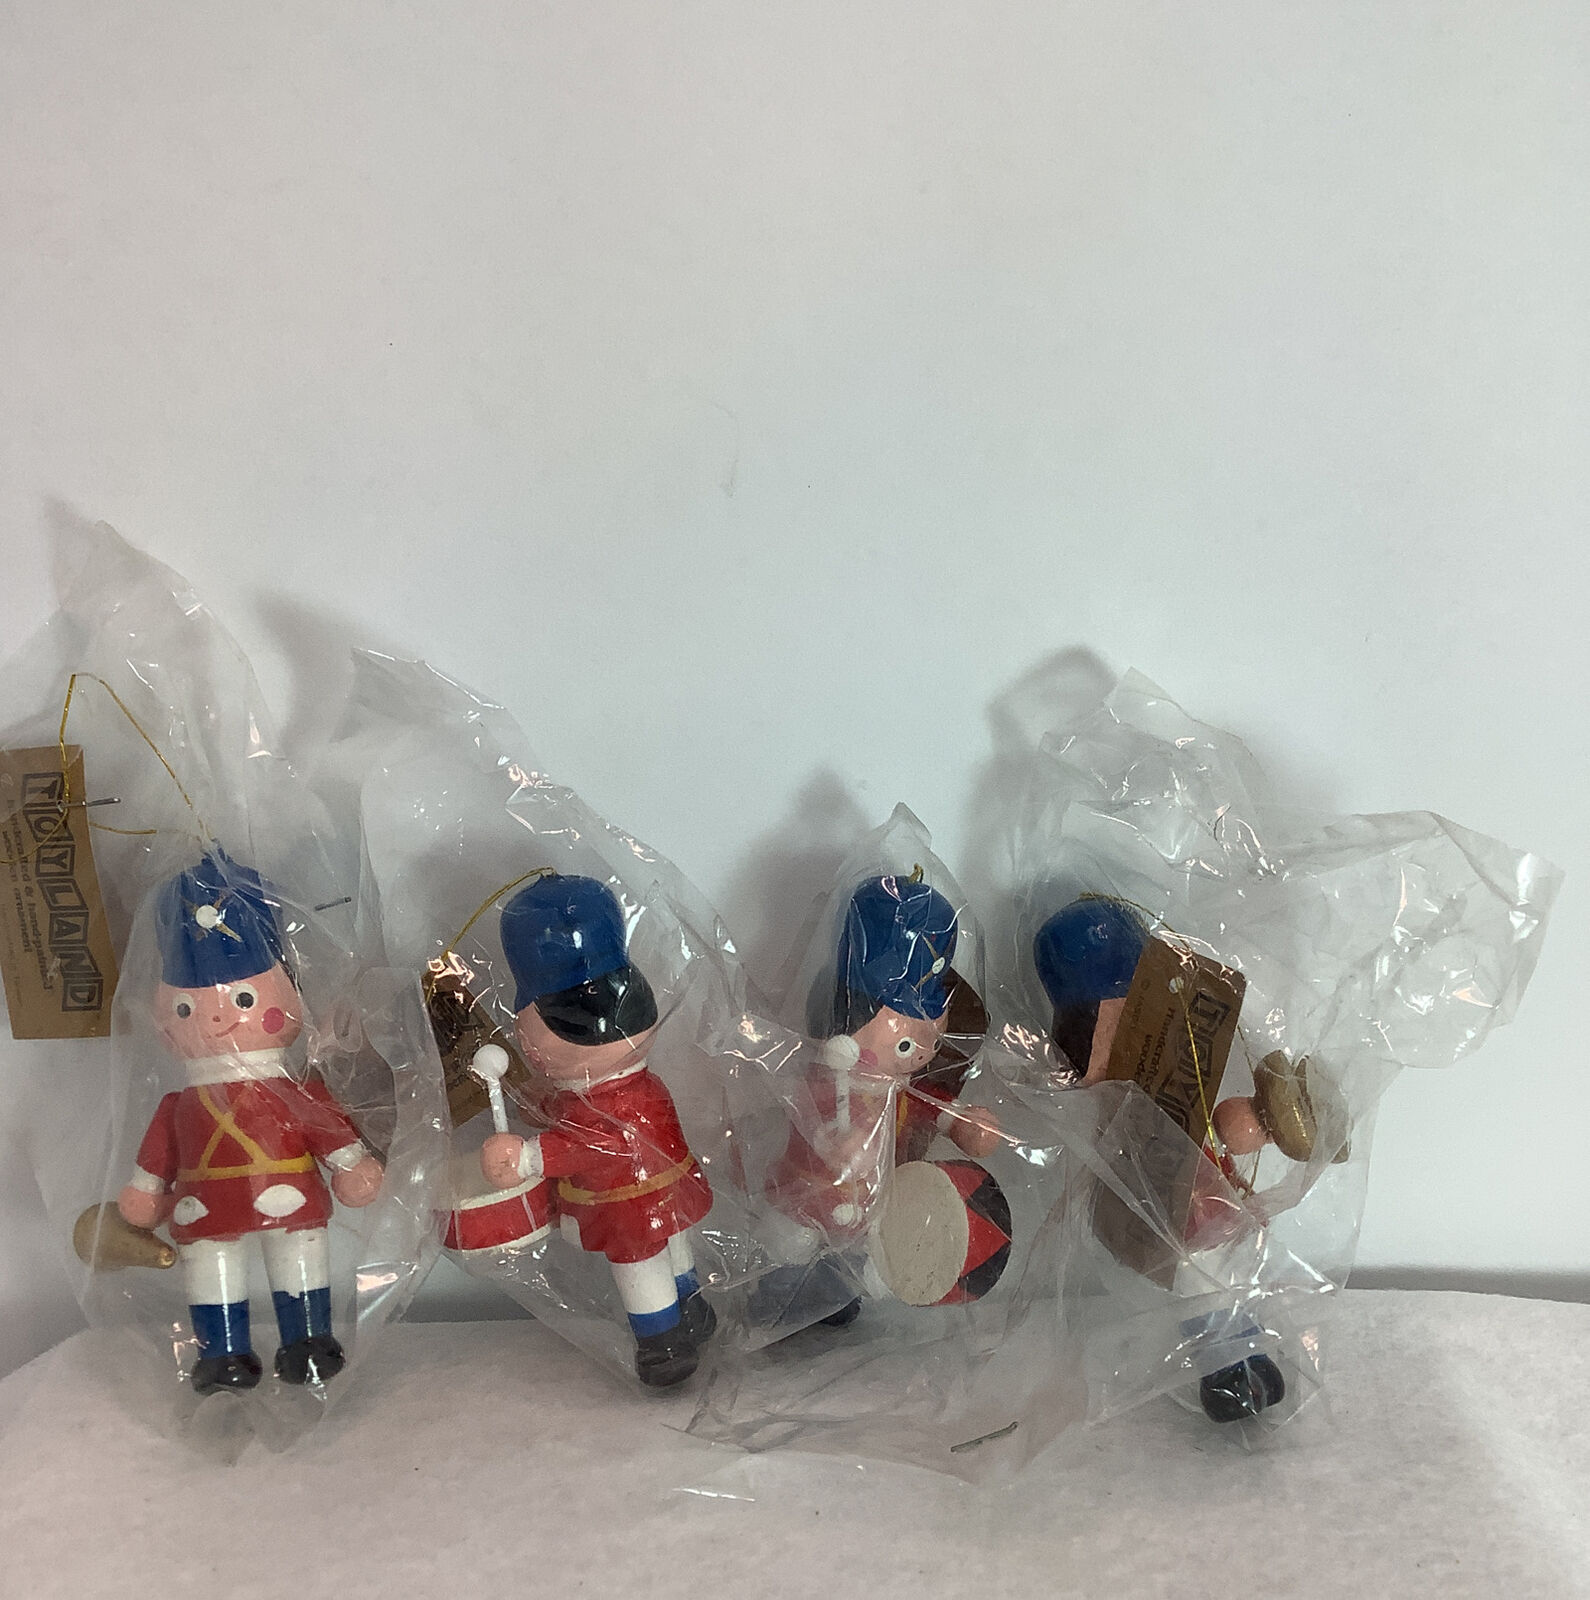 Vtg Jasco ToyLand 4 Wooden Toy SoldierOrnaments Hand Crafted Painted New D305